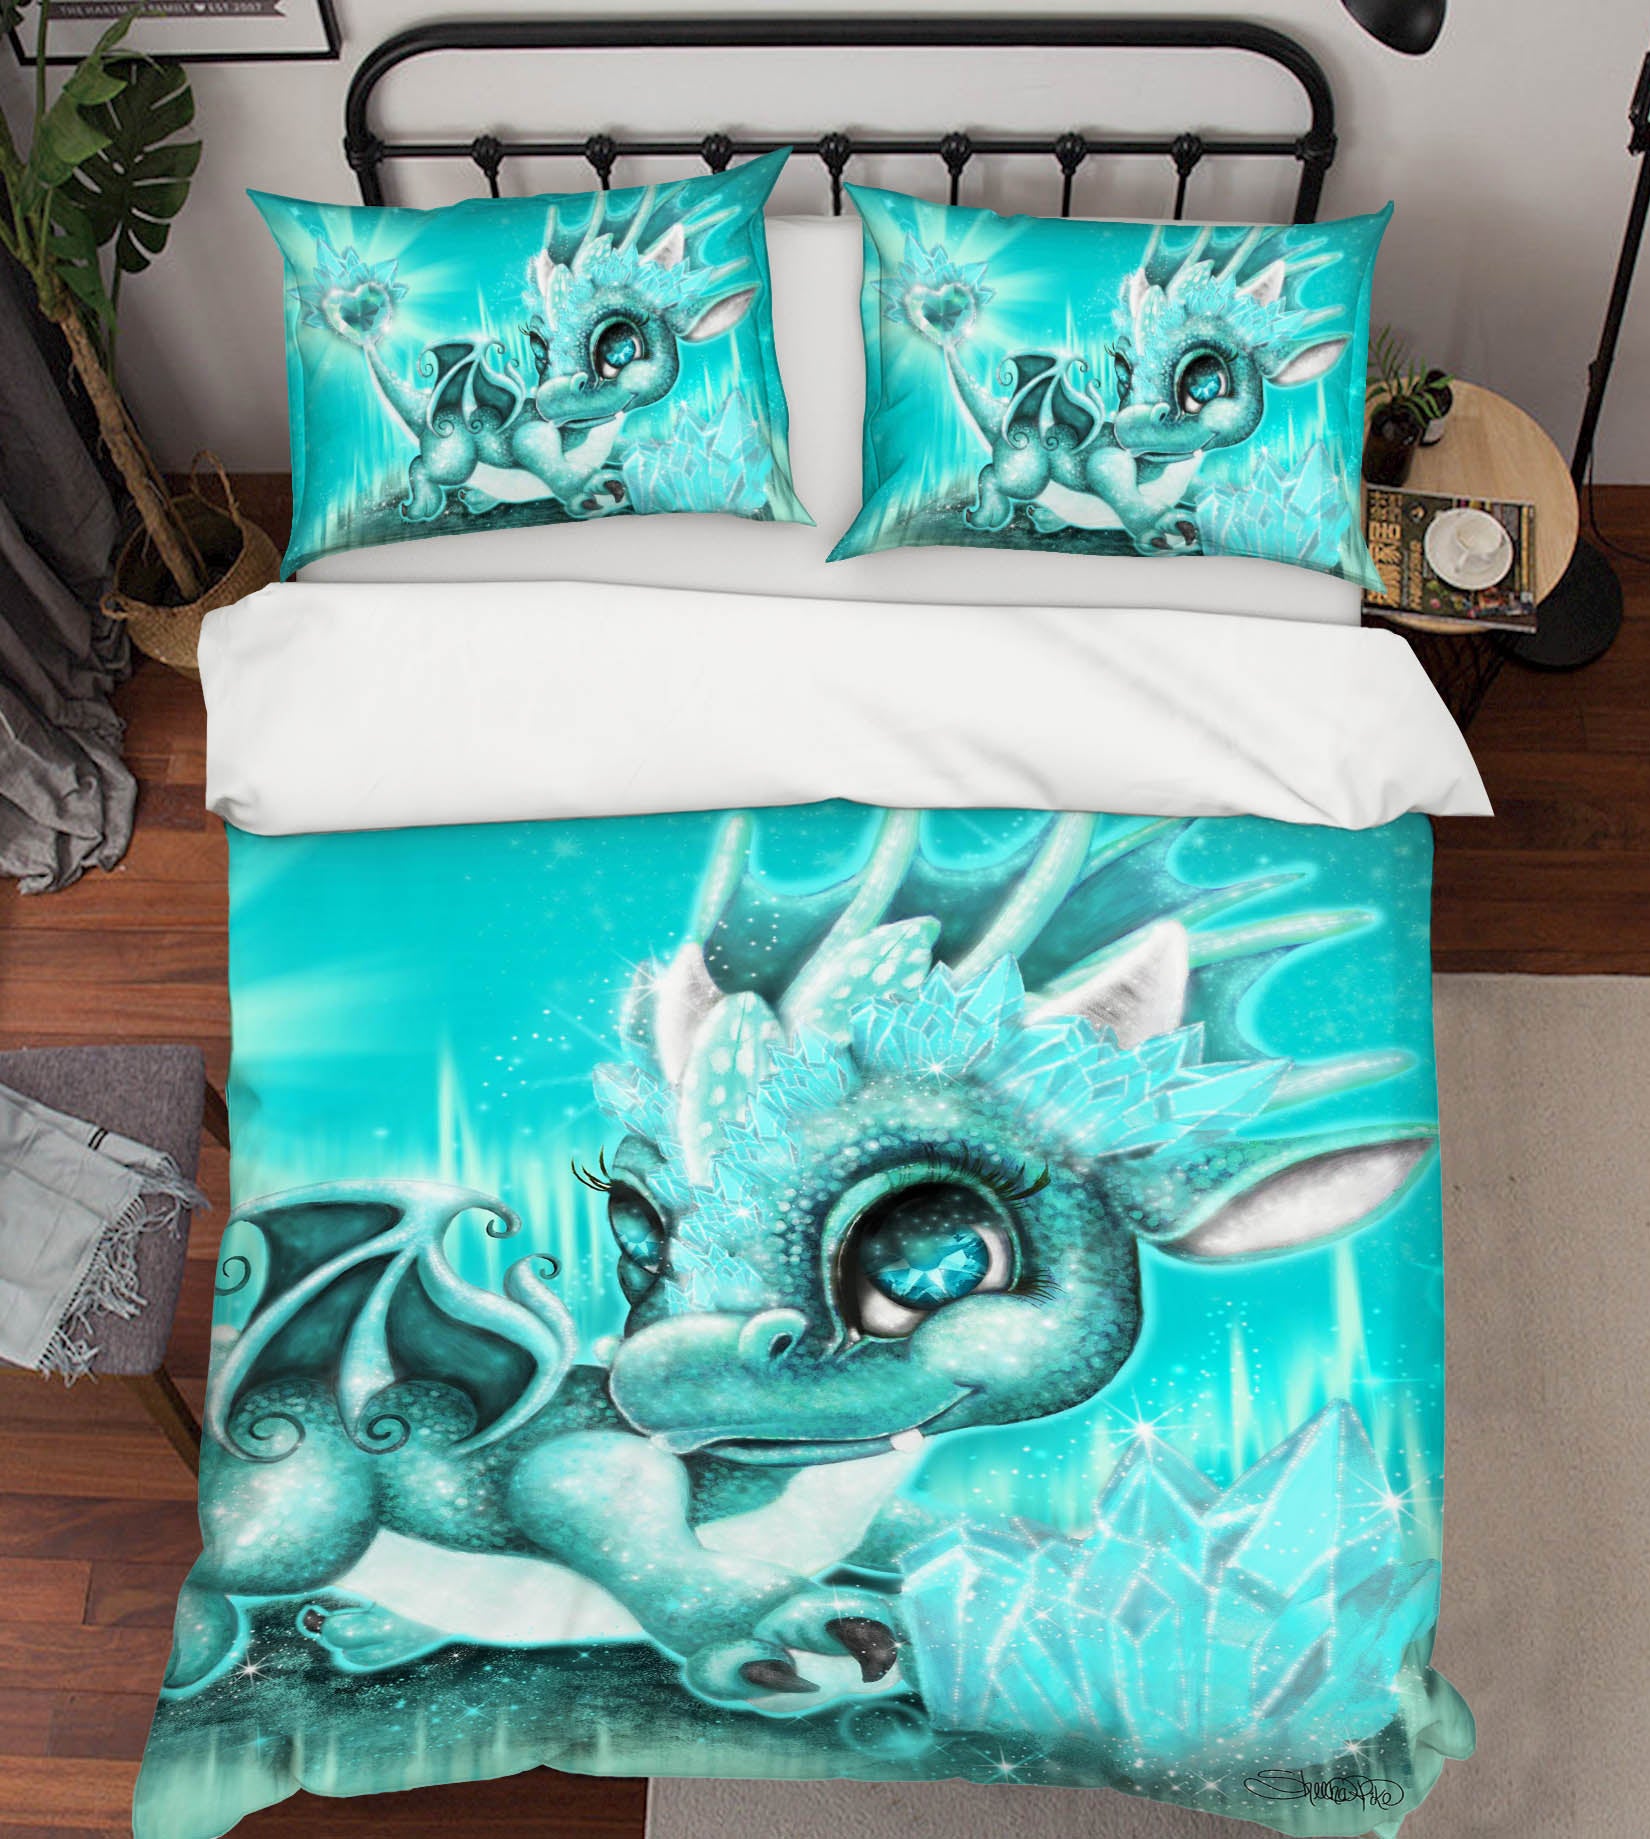 3D Blue Crystal Dragon 8571 Sheena Pike Bedding Bed Pillowcases Quilt Cover Duvet Cover